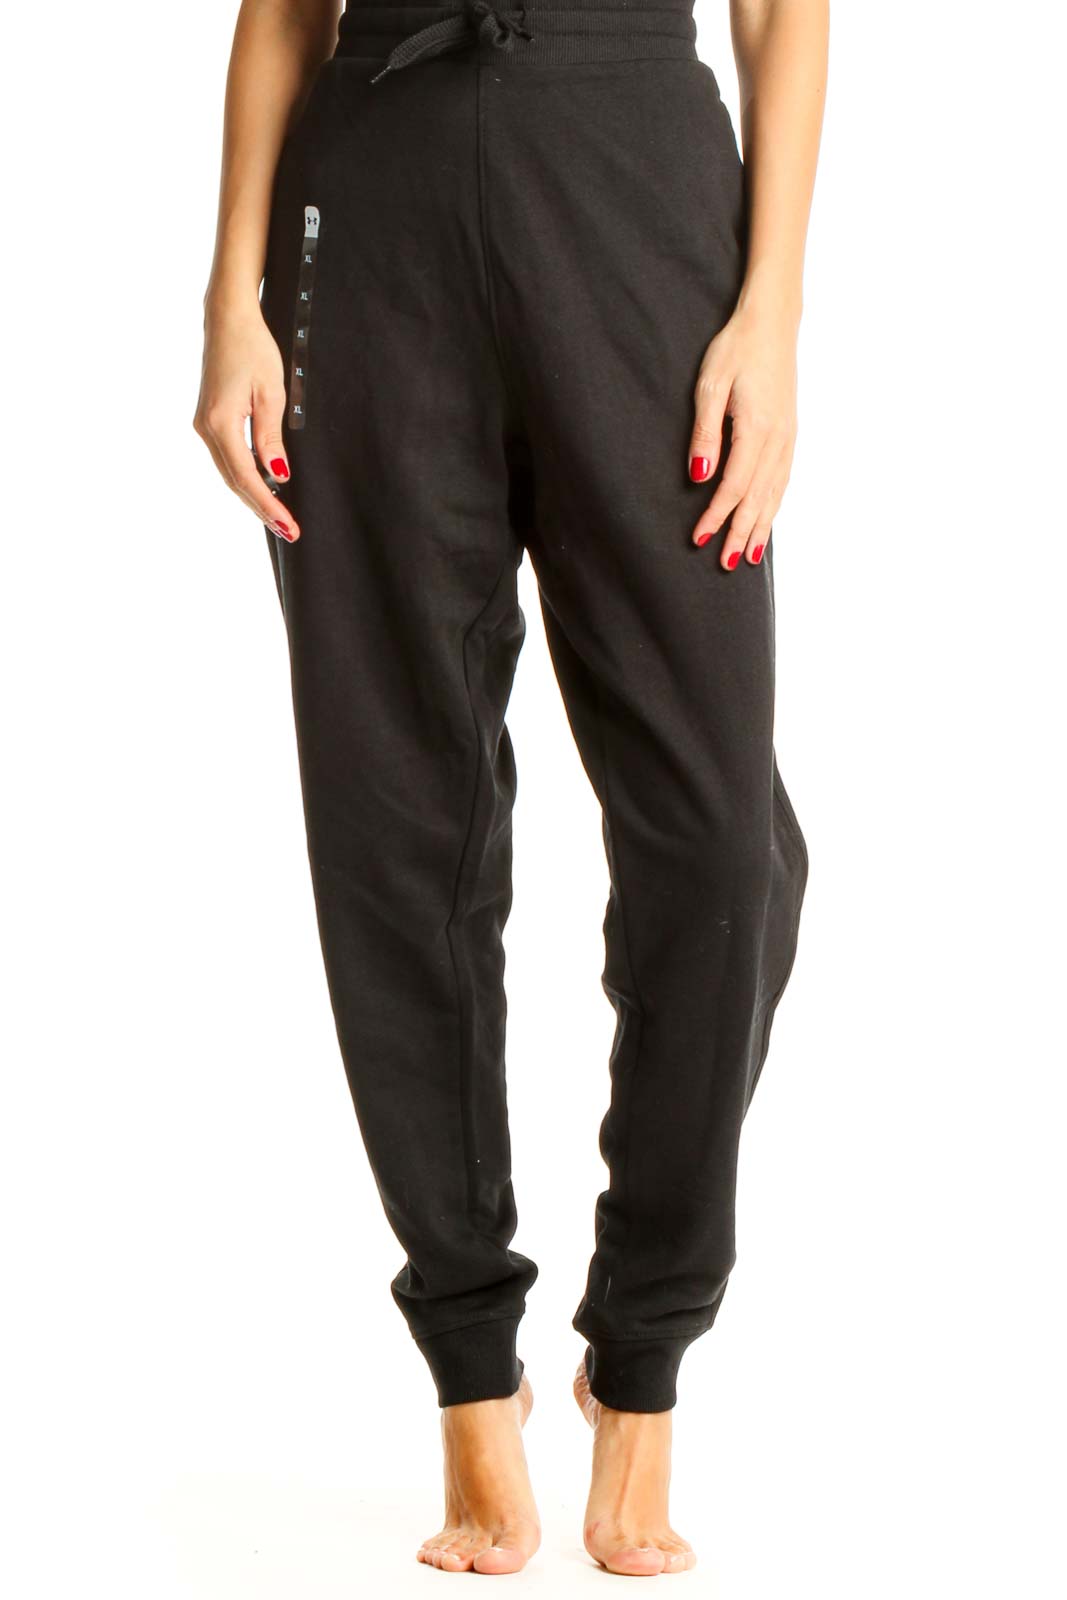 Black Textured Casual Sweatpants Front